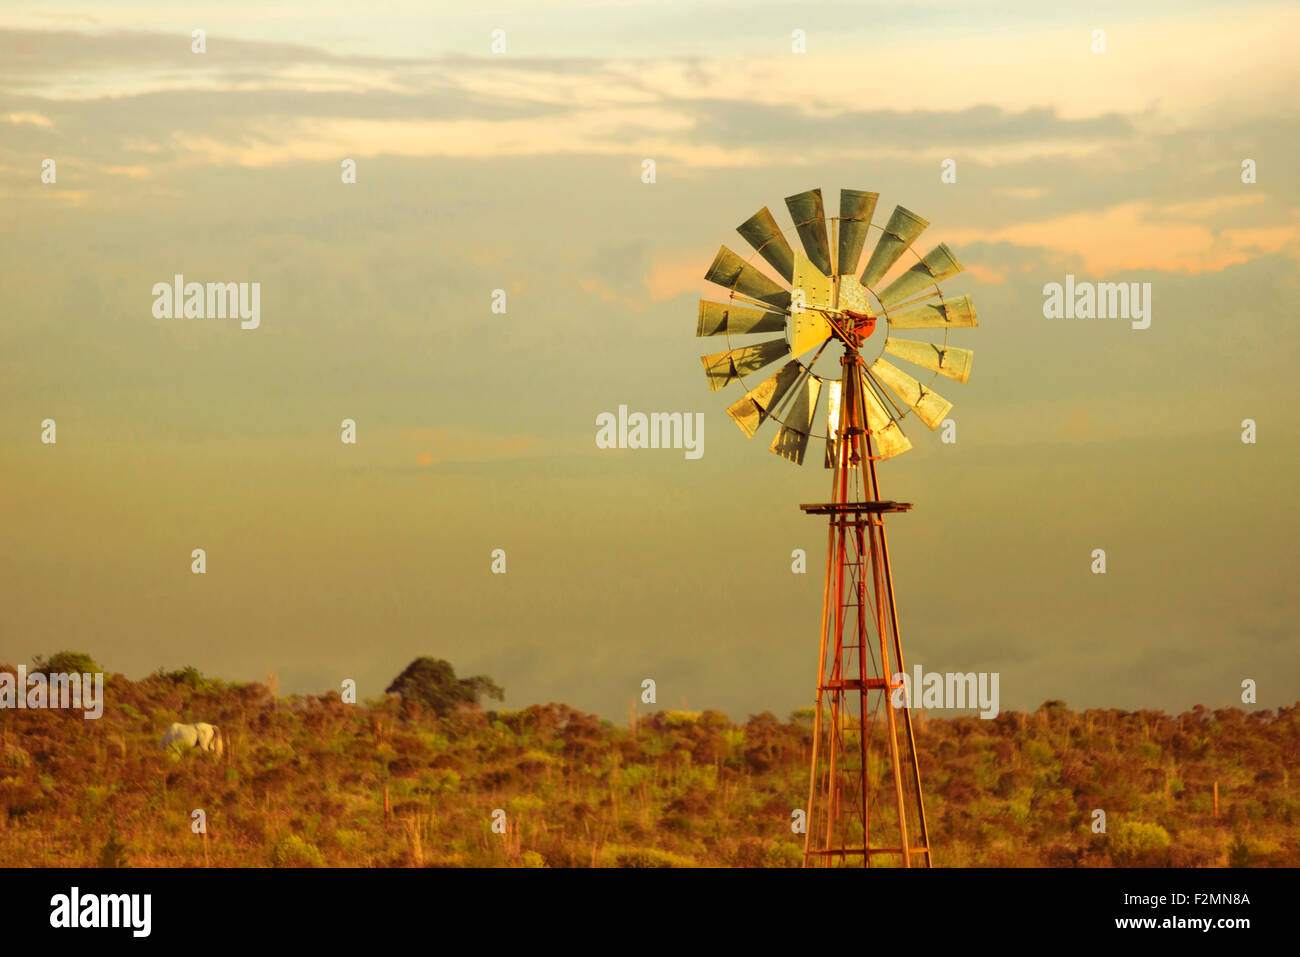 Countryside landscape with vintage wind mill over sunset sky and farm field in background. Stock Photo